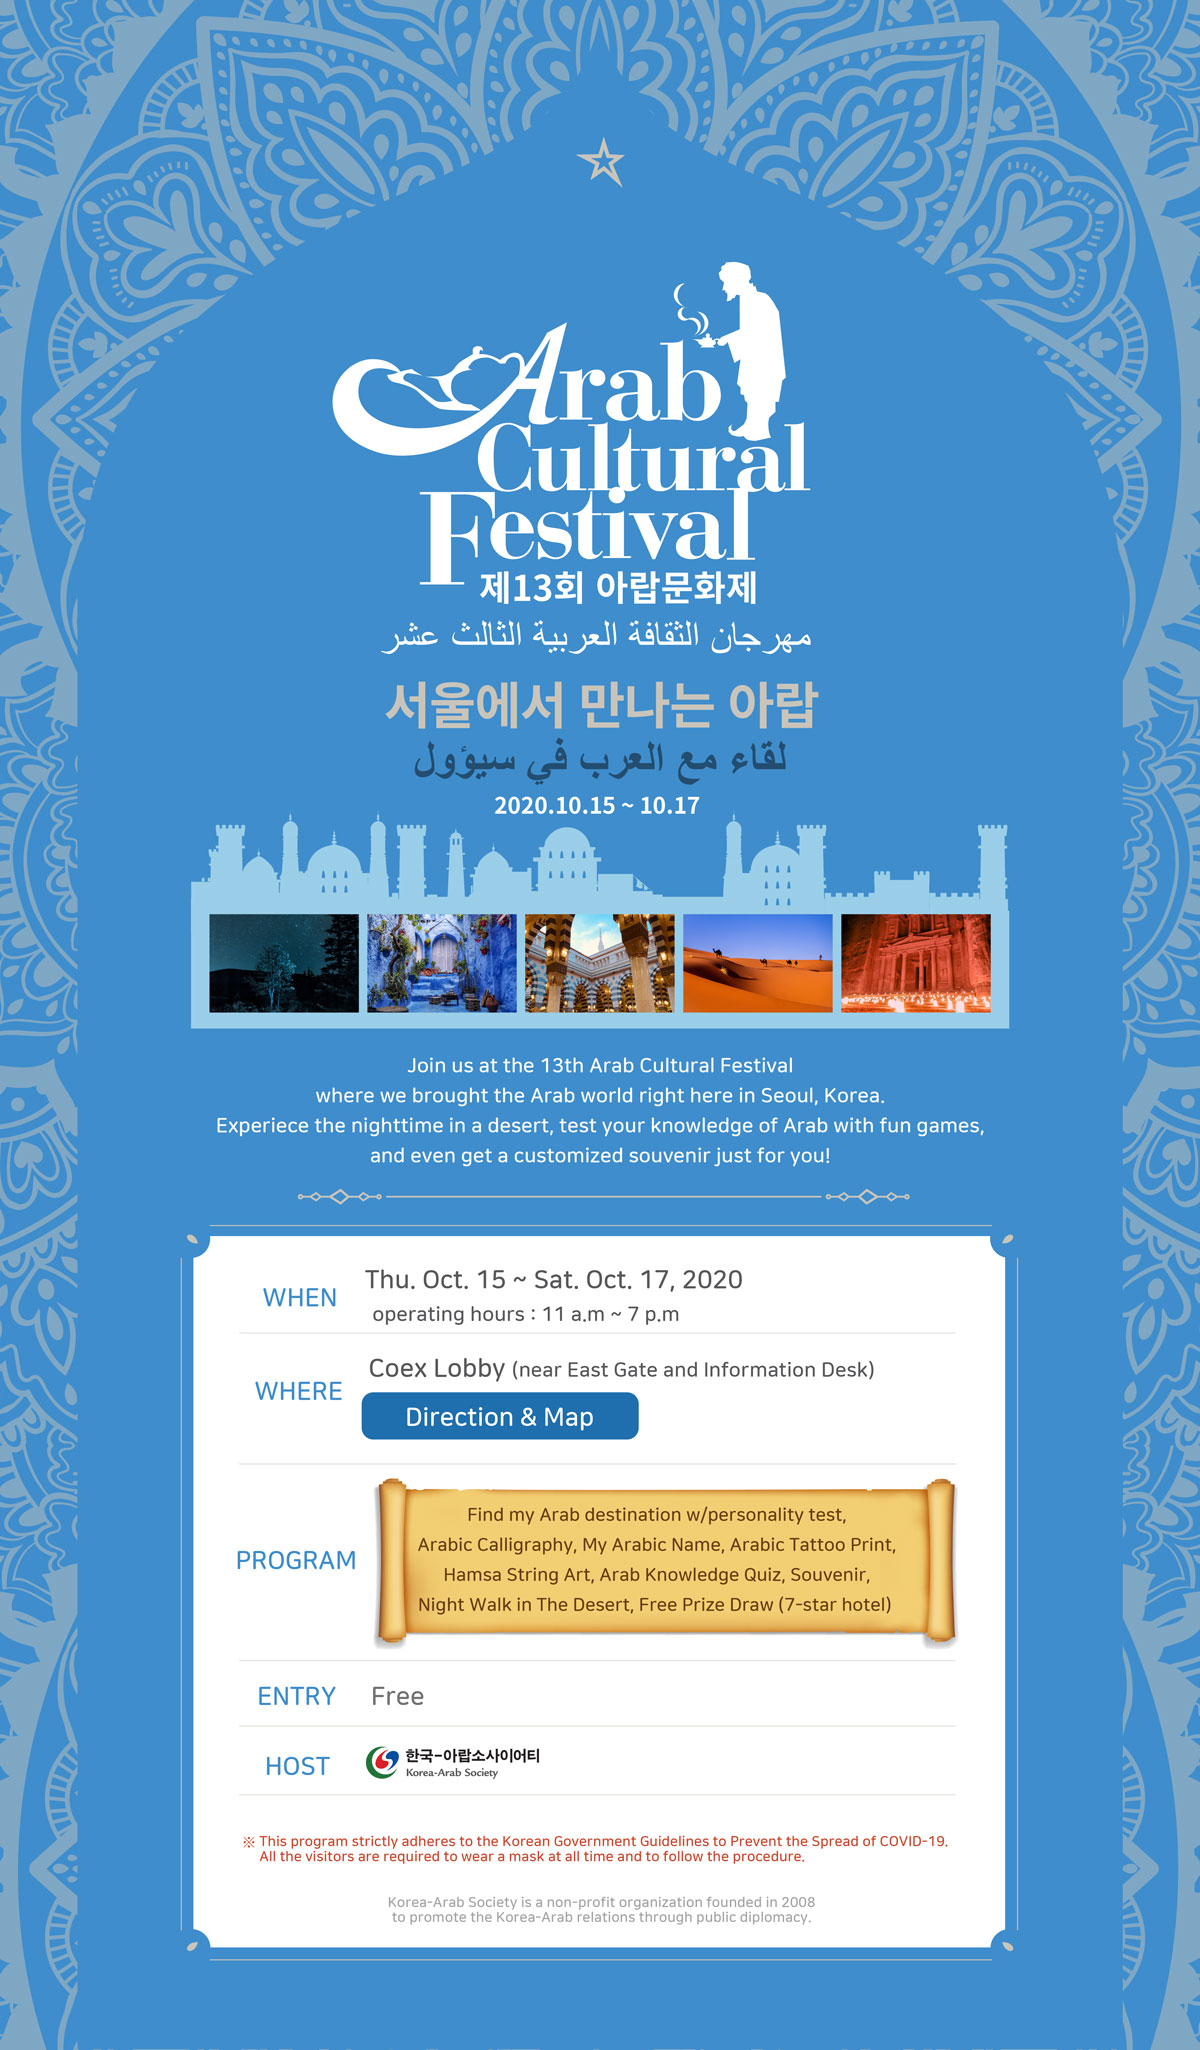 Arab Cultural Festival 제13회 아랍문화제 서울에서 만나는 아랍 لقاء مع العرب في سيؤول 2020.10.15 – 10.17 Join us at the 13th Arab Cultural Festival where we brought the Arab world right here in Seoul, Korea. Experiece the nighttime in a desert, test your knowledge of Arab with fun games, and even get a customized souvenir just for you! WHEN Thu. Oct. 15 ~ Sat. Oct. 17, 2020 operating hours: 11 a.m ~ 7 p.m Coex Lobby (near East Gate and Information Desk) WHERE Direction & Map PROGRAM Find my Arab destination w/personality test, Arabic Calligraphy, My Arabic Name, Arabic Tattoo Print, Hamsa String Art, Arab Knowledge Quiz, Souvenir, Night Walk in The Desert, Free Prize Draw (7-star hotel) ENTRY Free HOST 한국-아랍소사이어티 Korea-Arab Society * This program strictly adheres to the Korean Government Guidelines to Prevent the Spread of COVID-19. All the visitors are required to wear a mask at all time and to follow the procedure. Korea-Arab Society is a non-profit organization founded in 2008 to promote the Korea-Arab relations through public diplomacy.